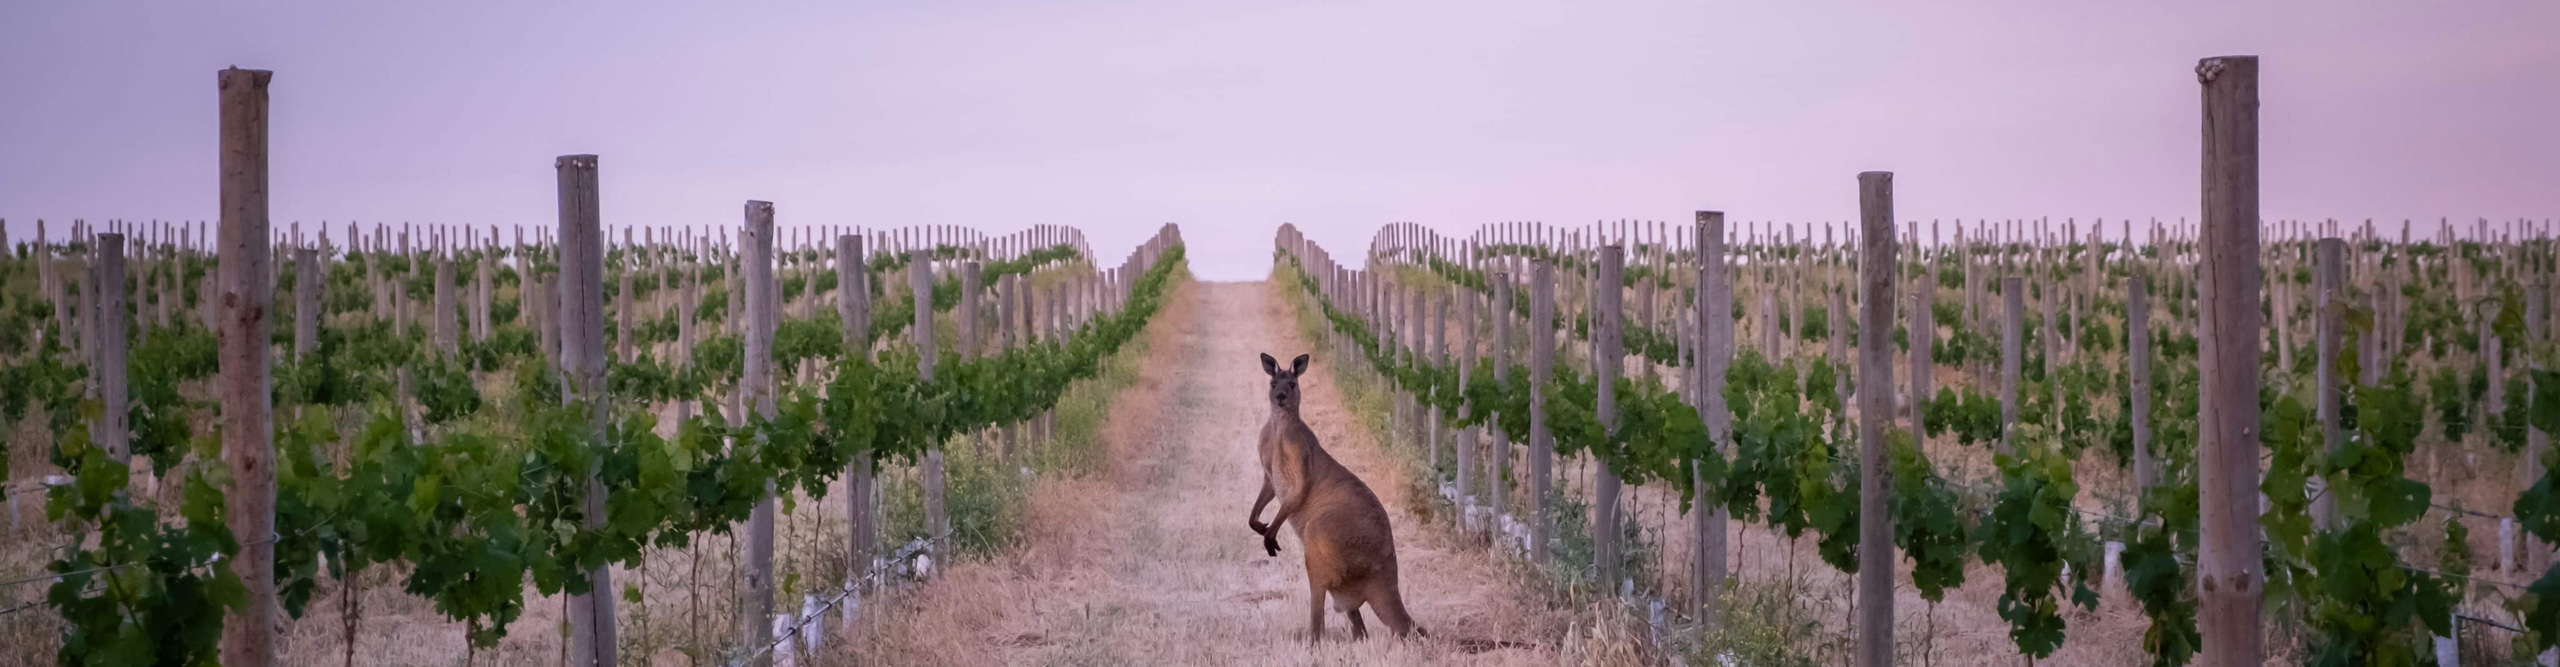 Kangaroo amongst the vines in a vineyard in the Barossa Valley, at dusk, South Australia 